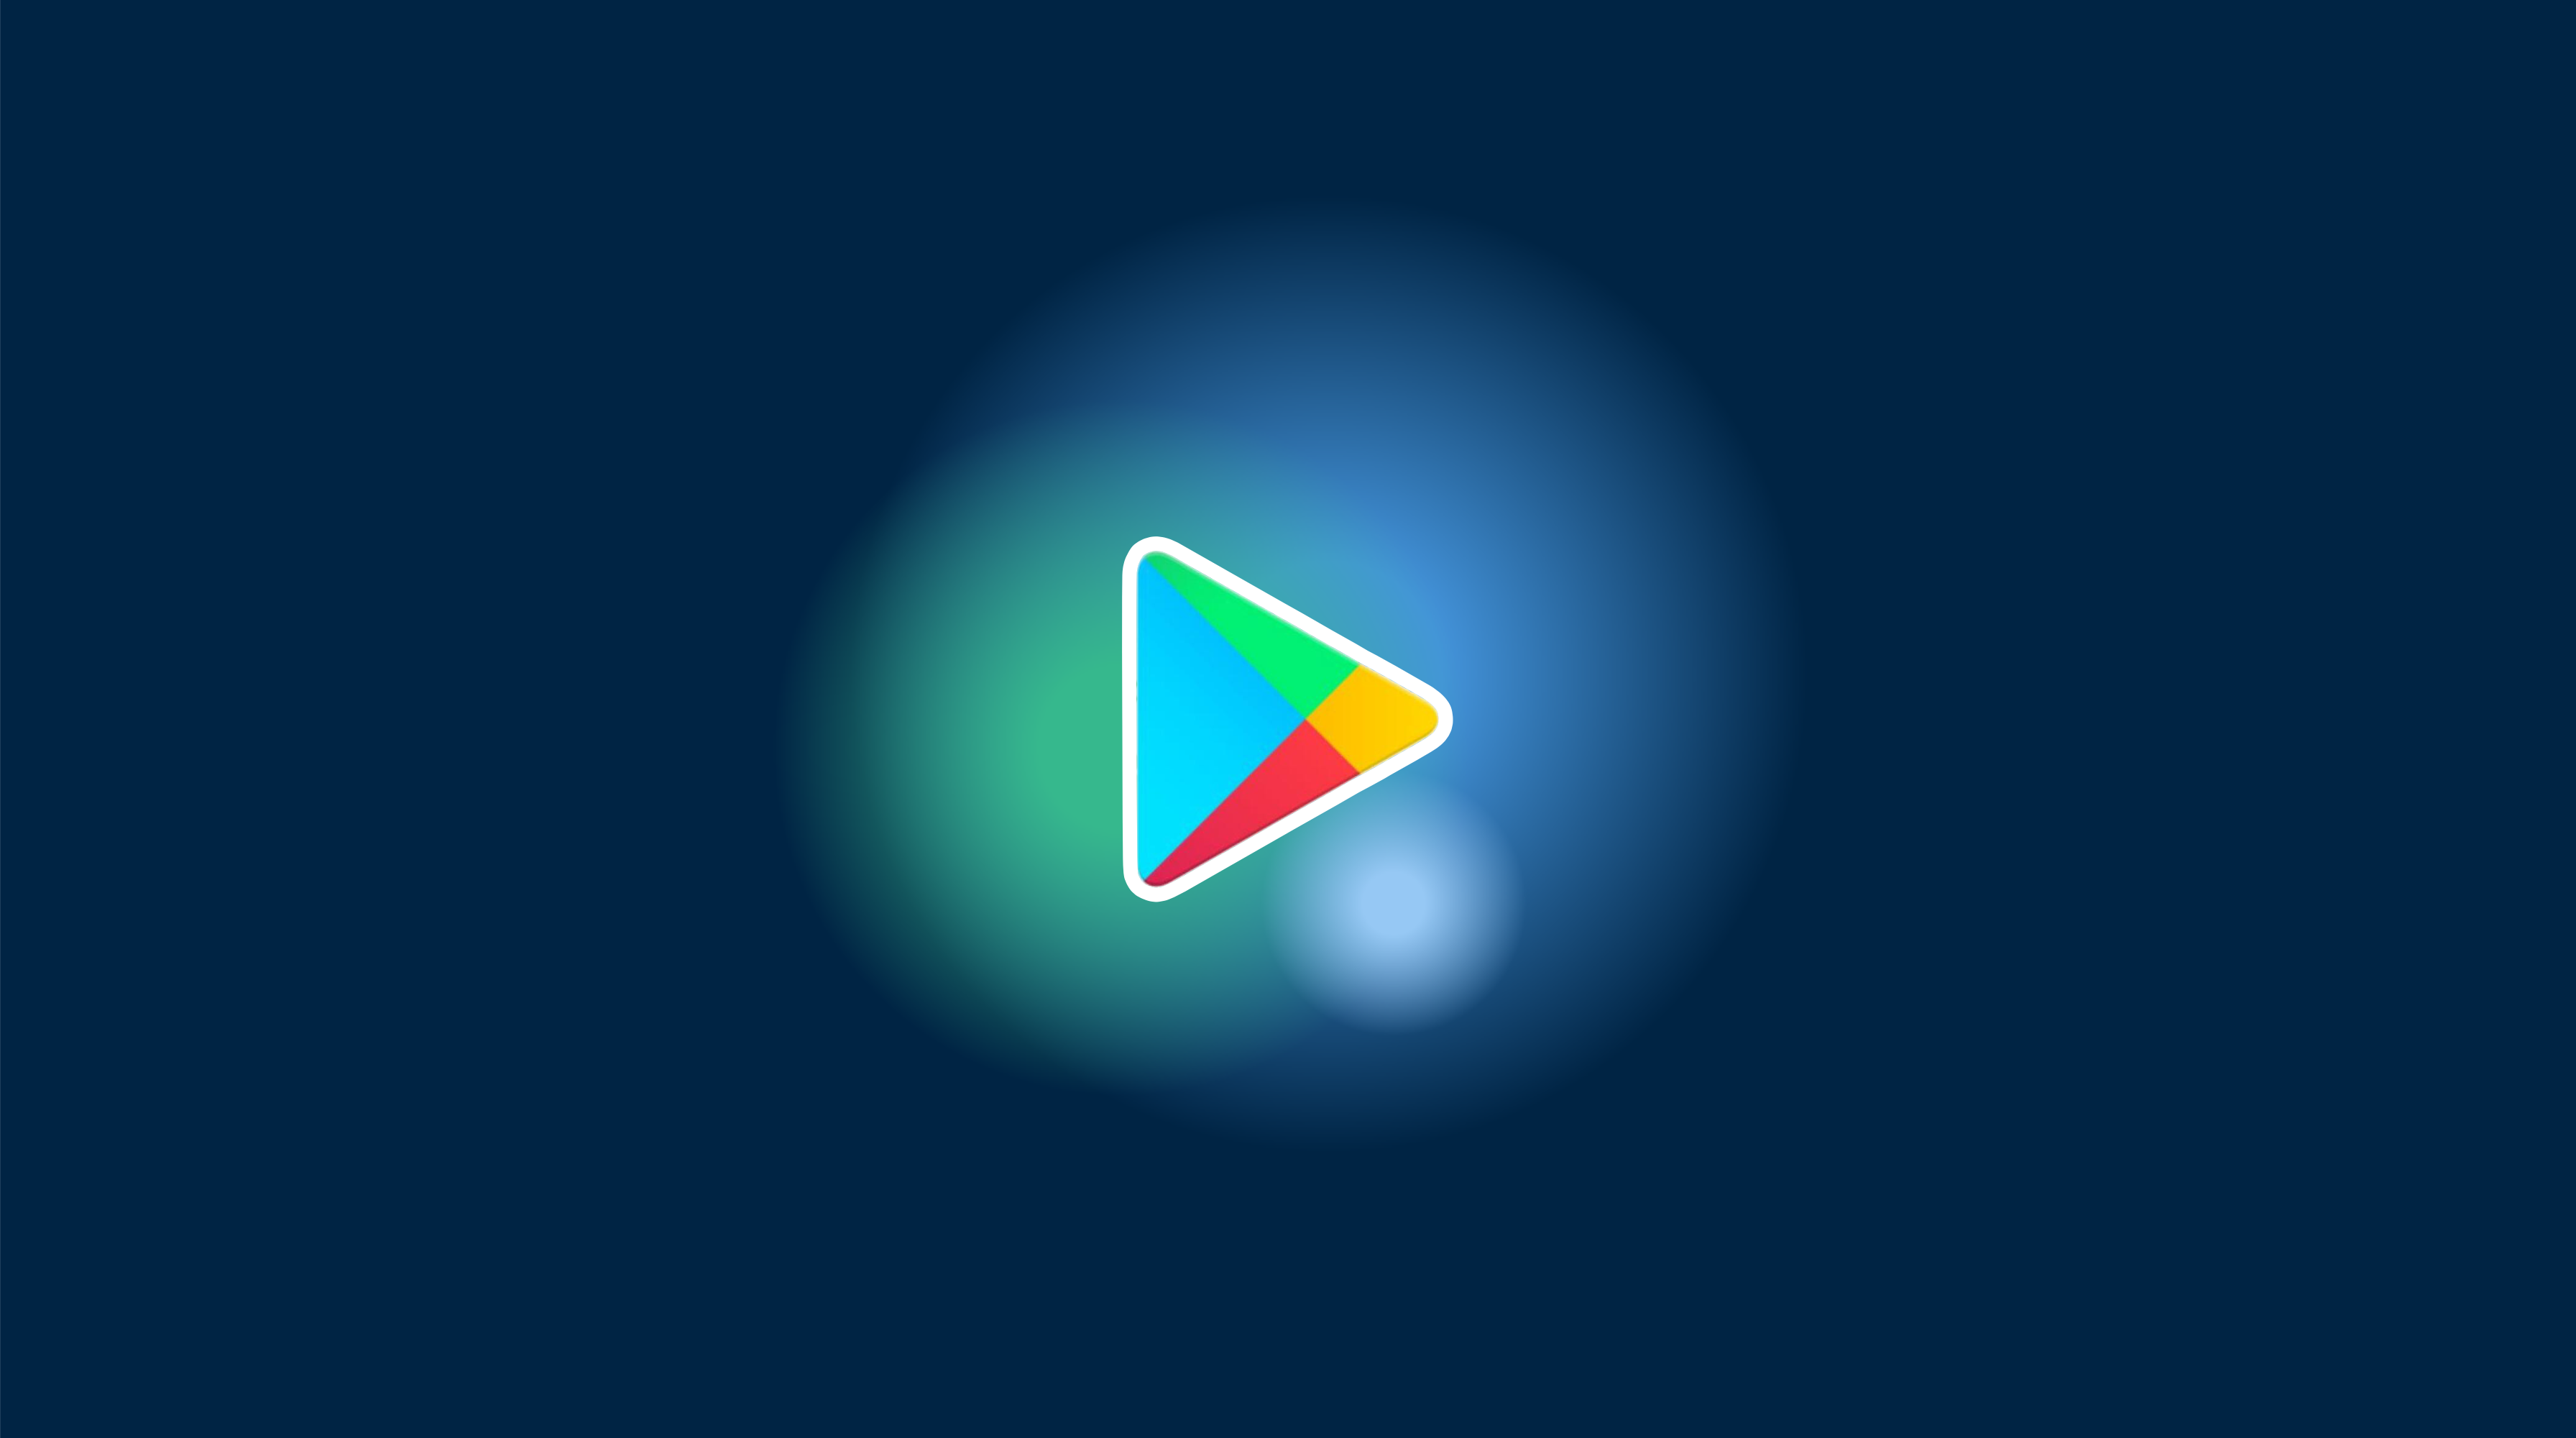 Side+ – Apps no Google Play